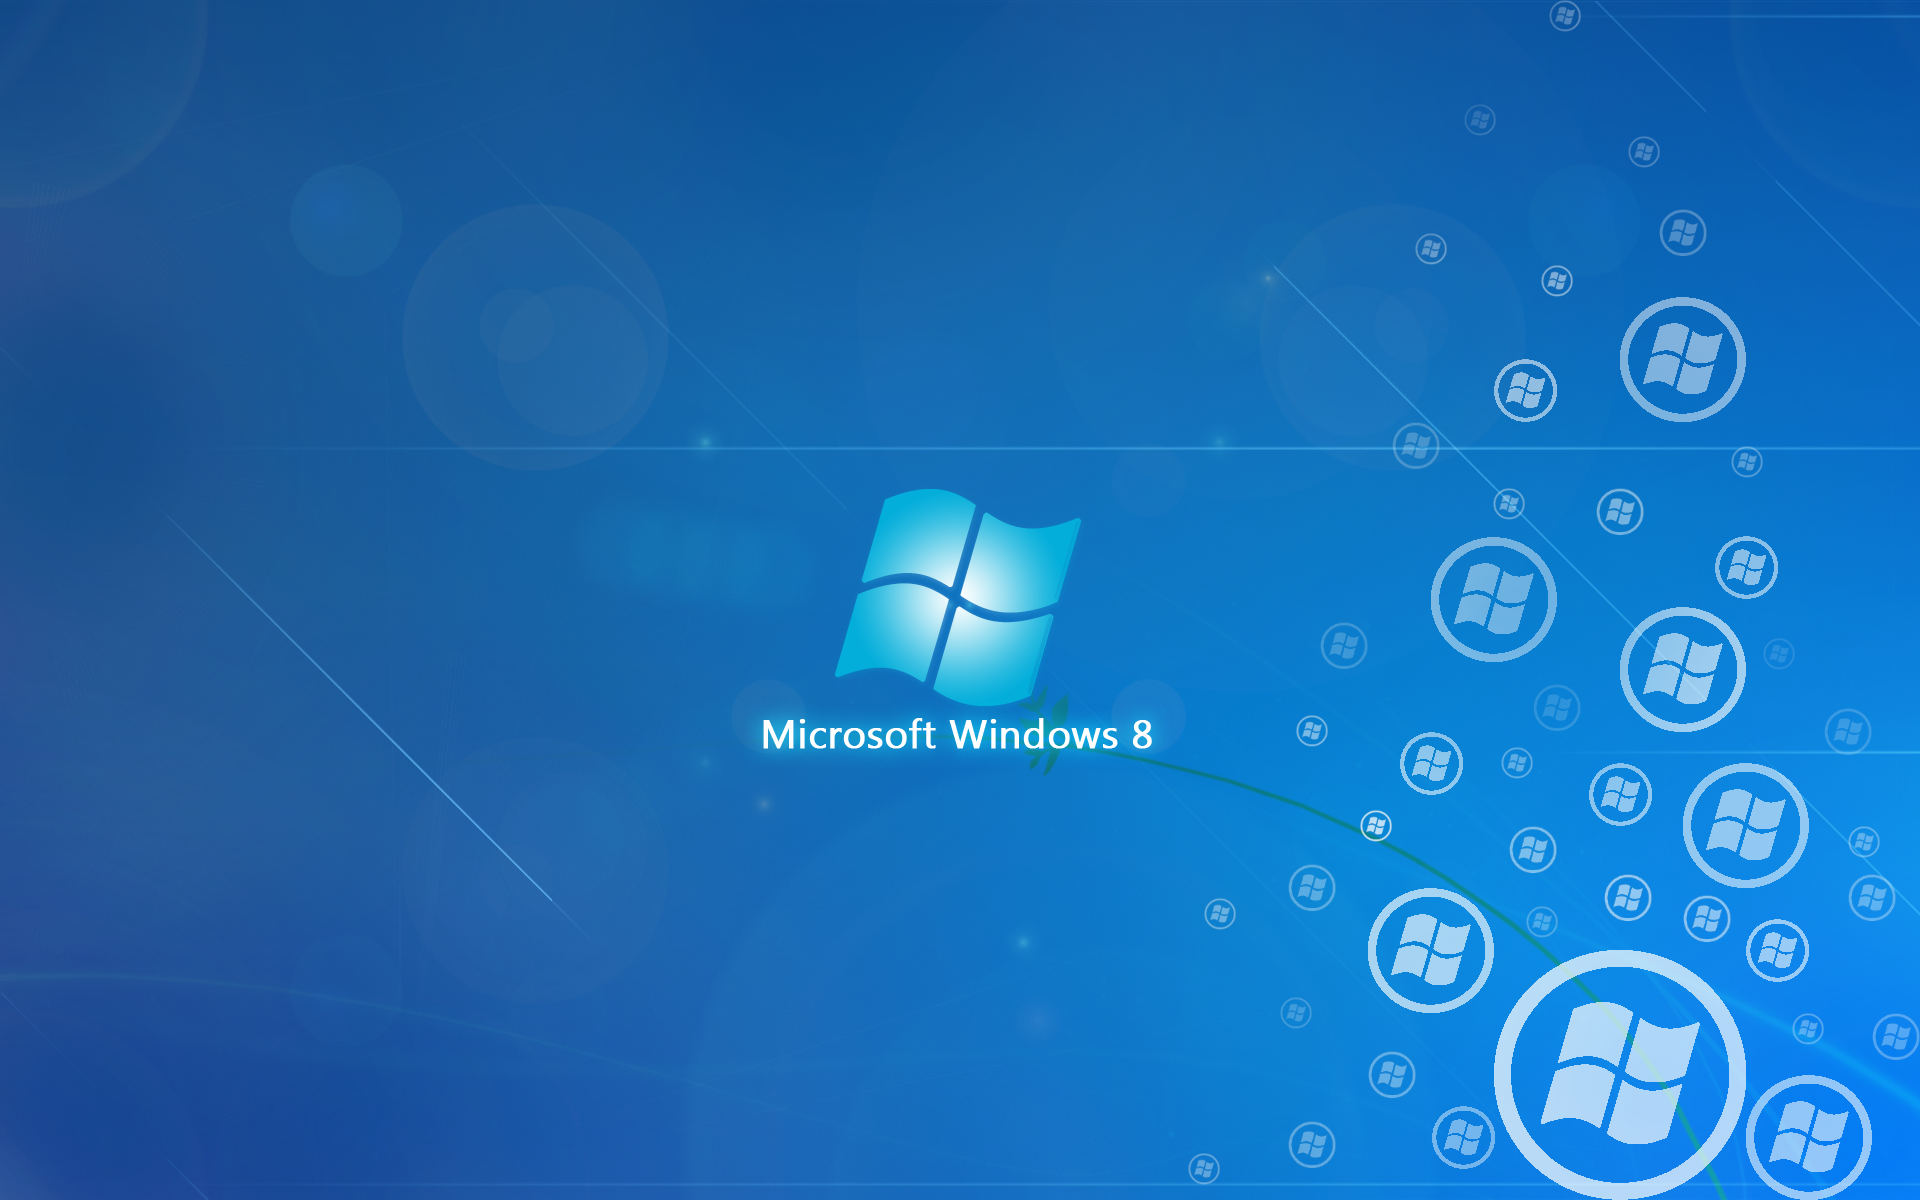 Download Microsoft Windows 8 Wallpapers Pack 1   wallpapers   TechMynd 1920x1200